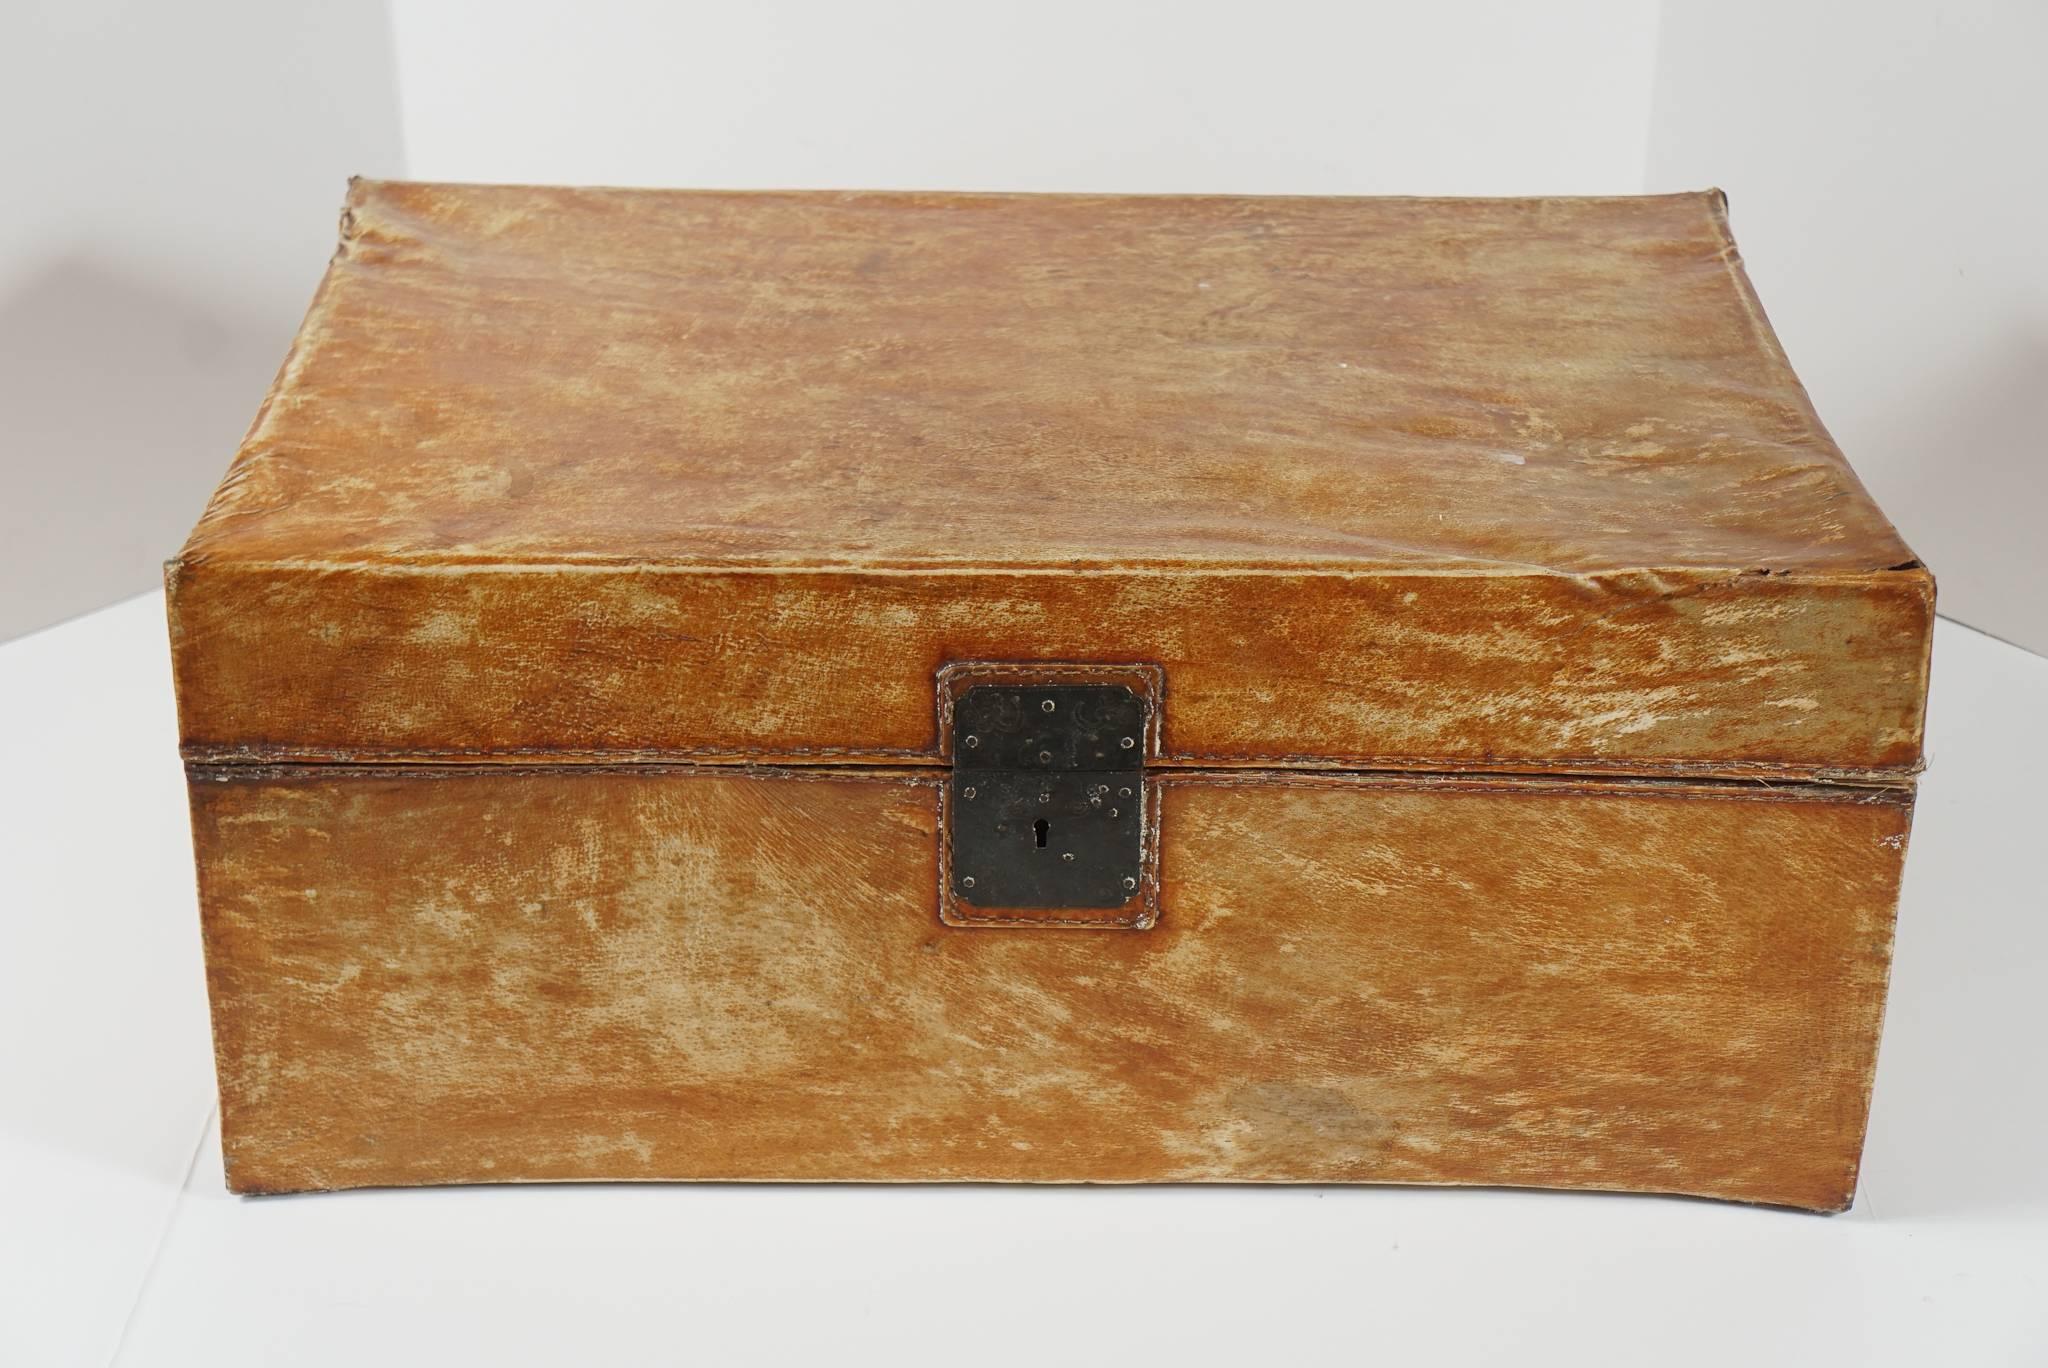 Chinese Export Camphor Wood and Pig Skin Covered Trunk from the Estate of Bunny Mellon